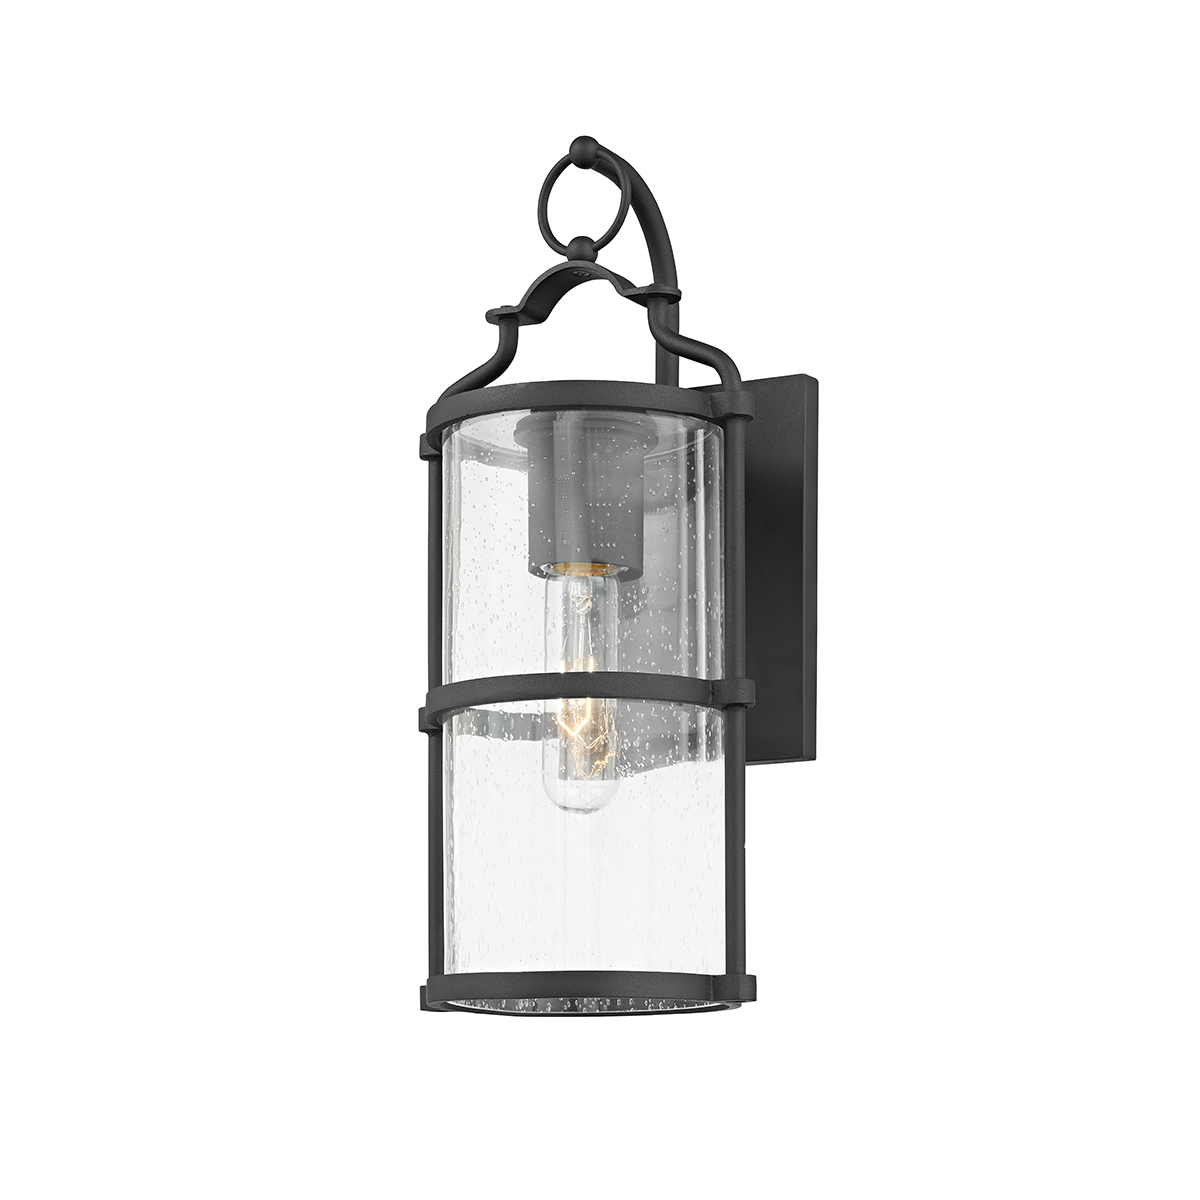 Troy BURBANK 1 LIGHT SMALL EXTERIOR WALL SCONCE B1311 Outdoor l Wall Troy Lighting   